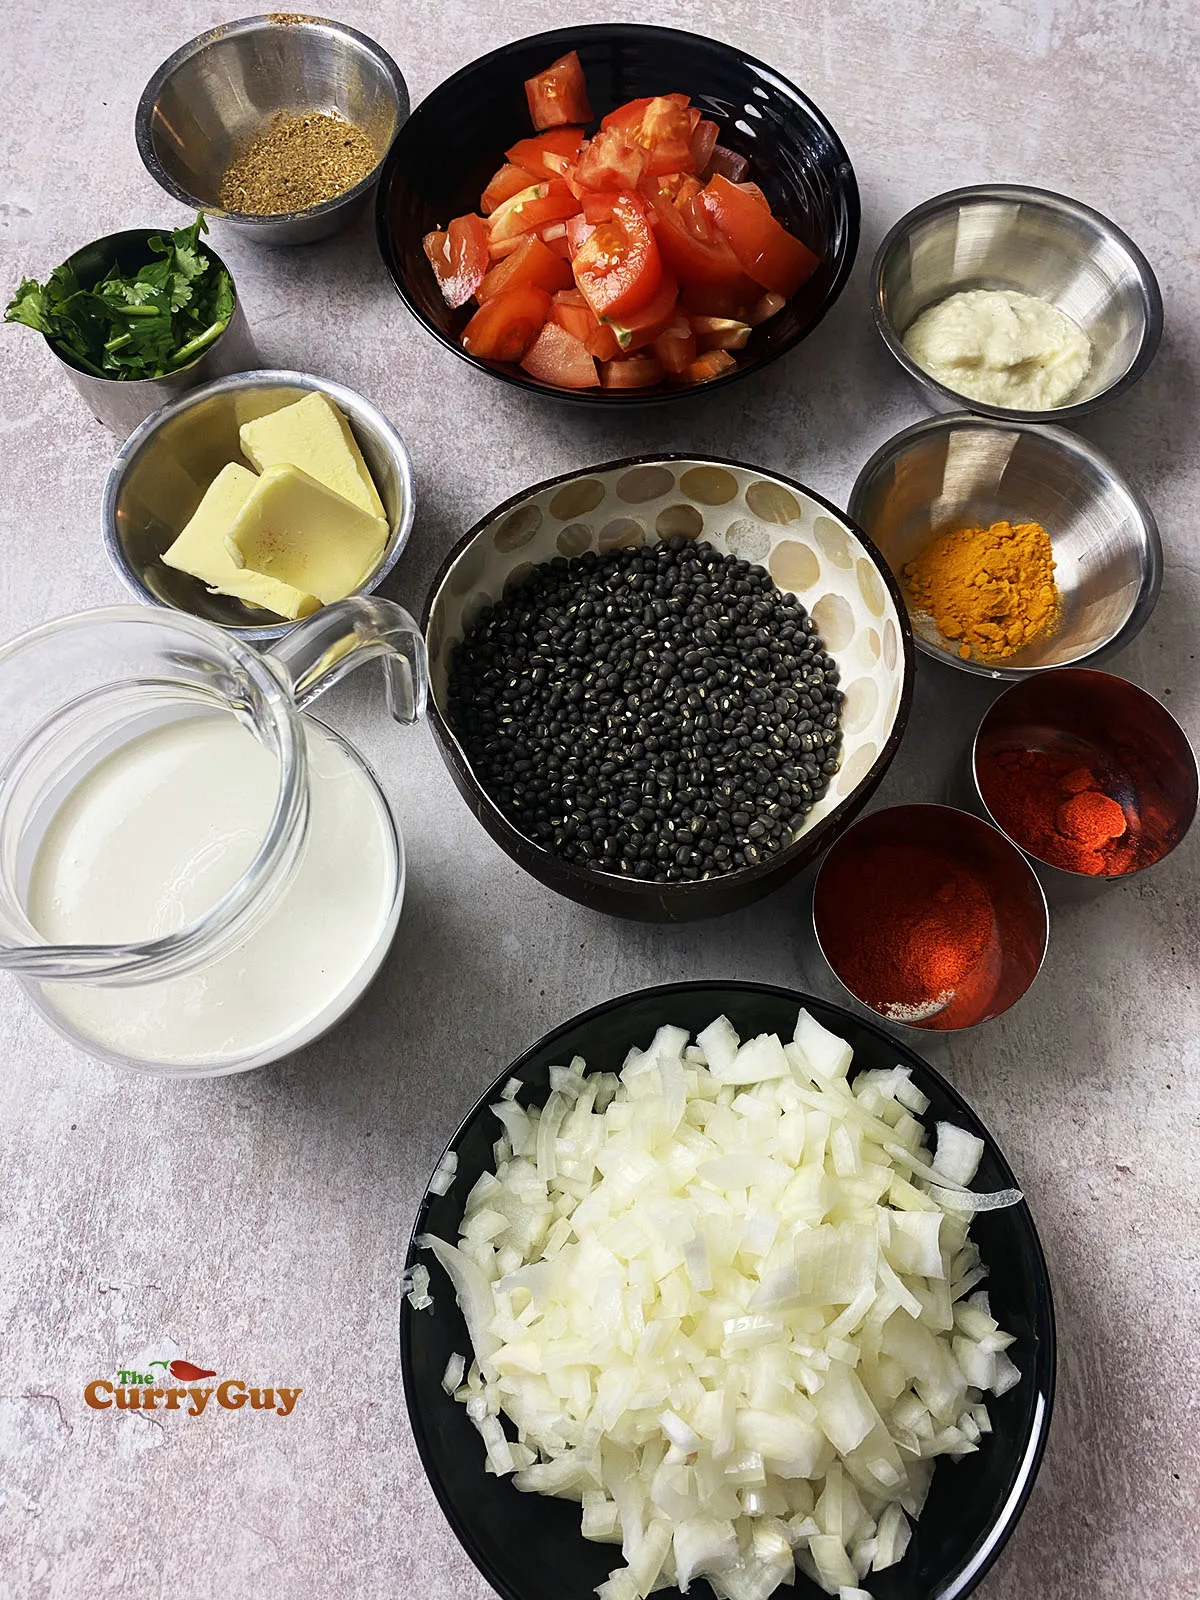 Ingredients for dal makhani